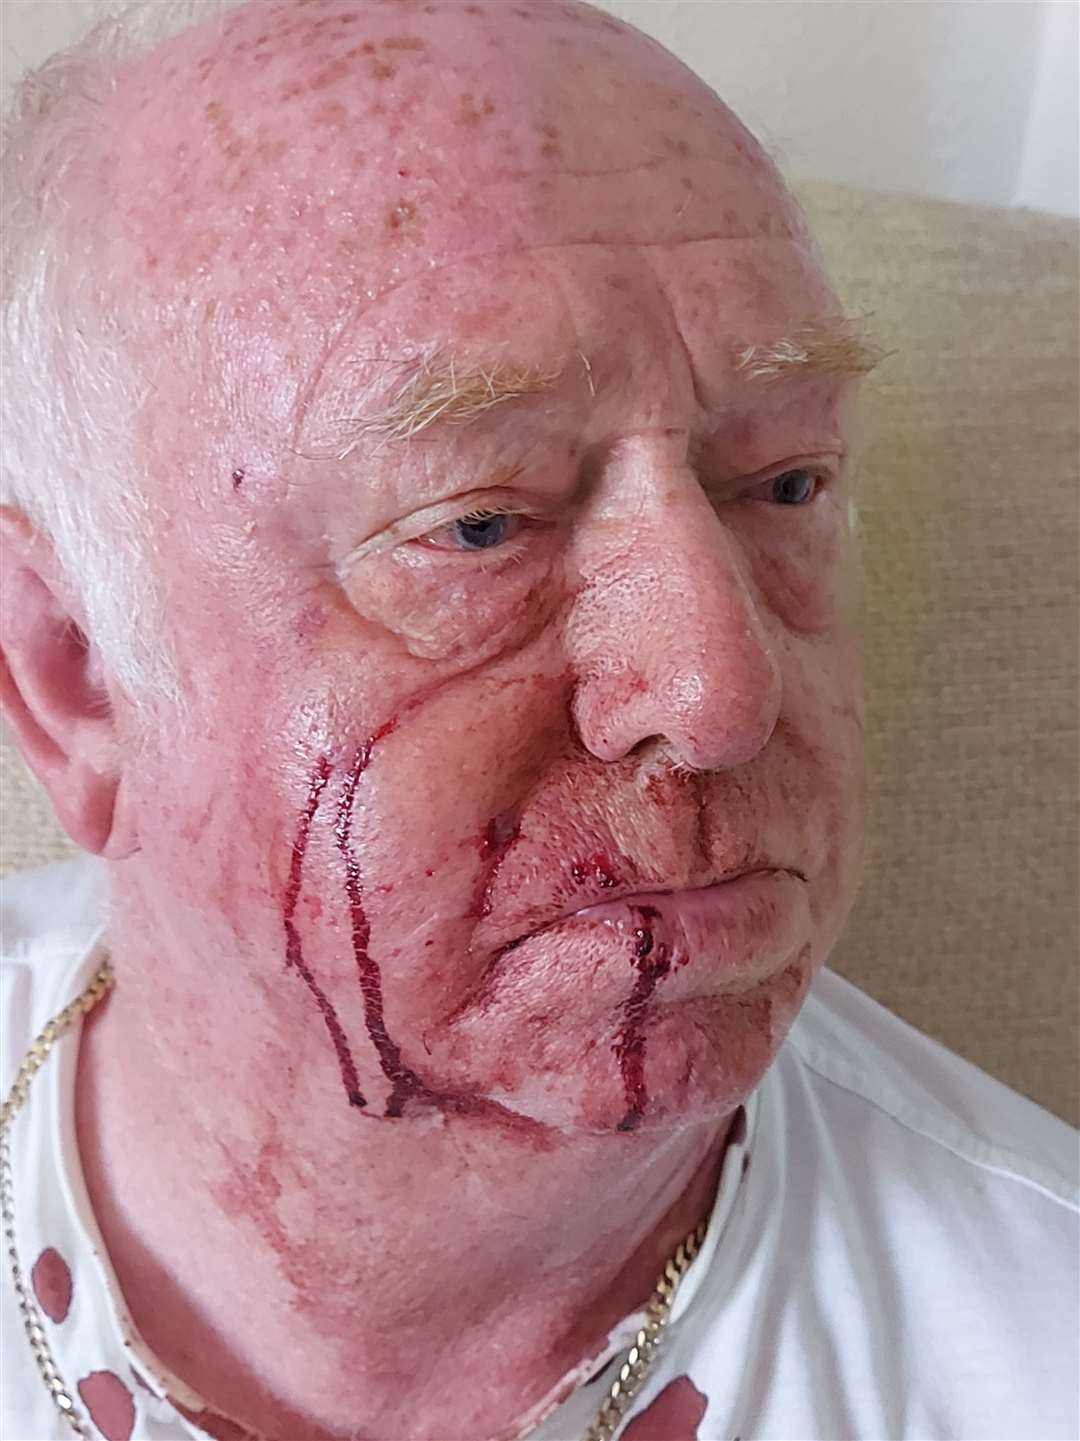 Mr Champs suffered facial injuries in the alleged attack